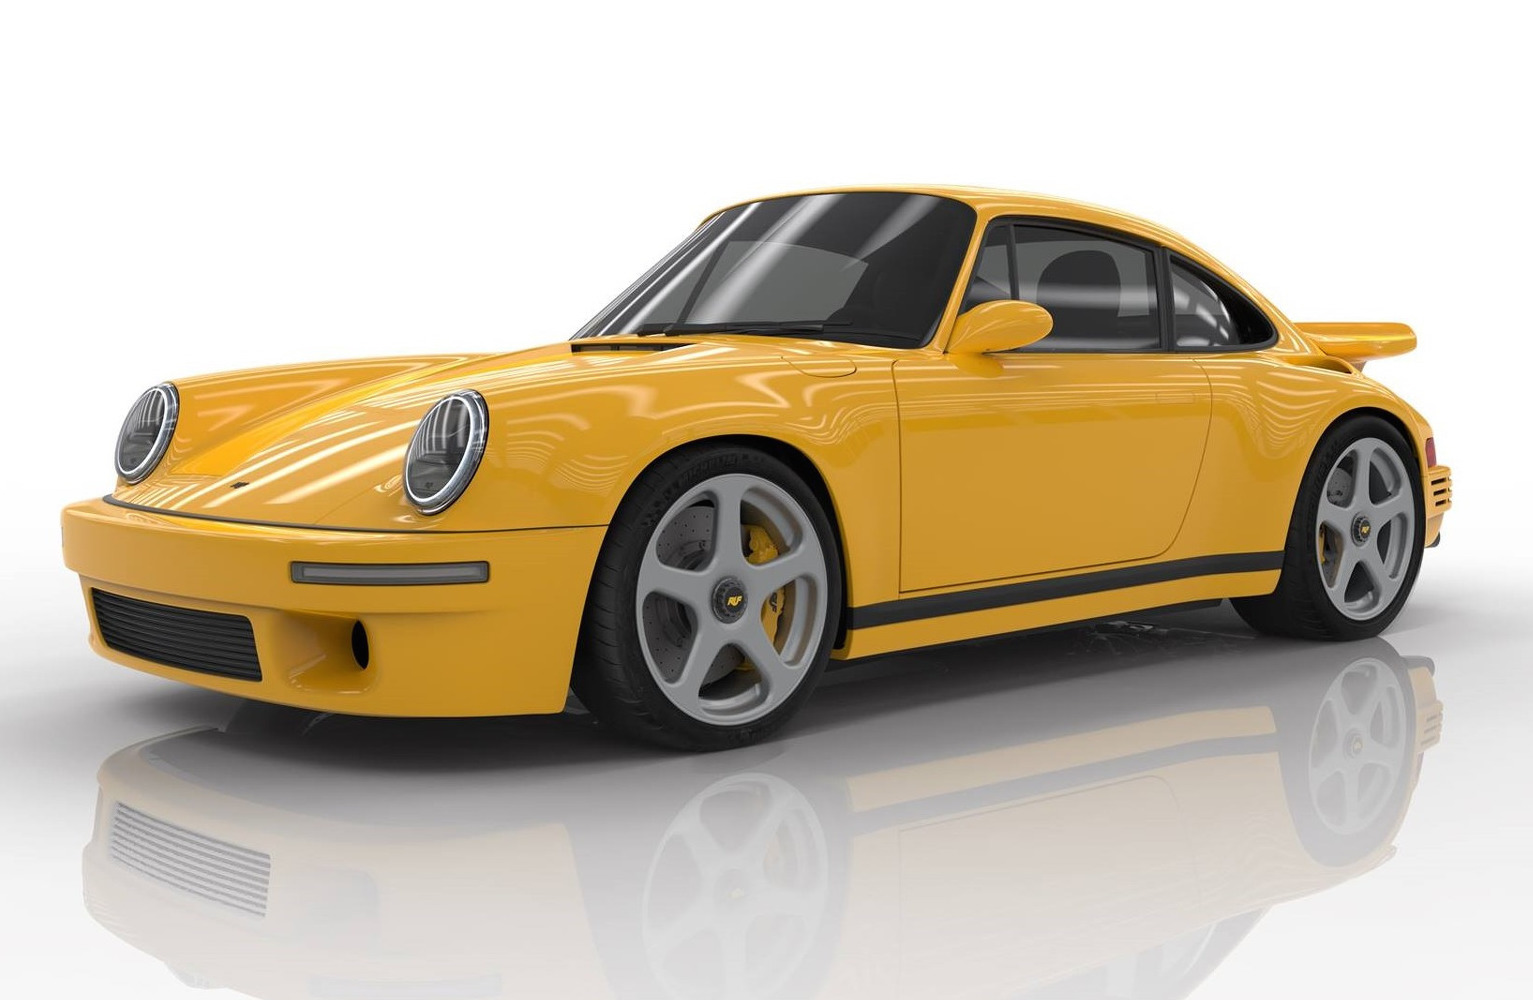 Ruf reinvents the CTR Yellowbird with 2017 CTR